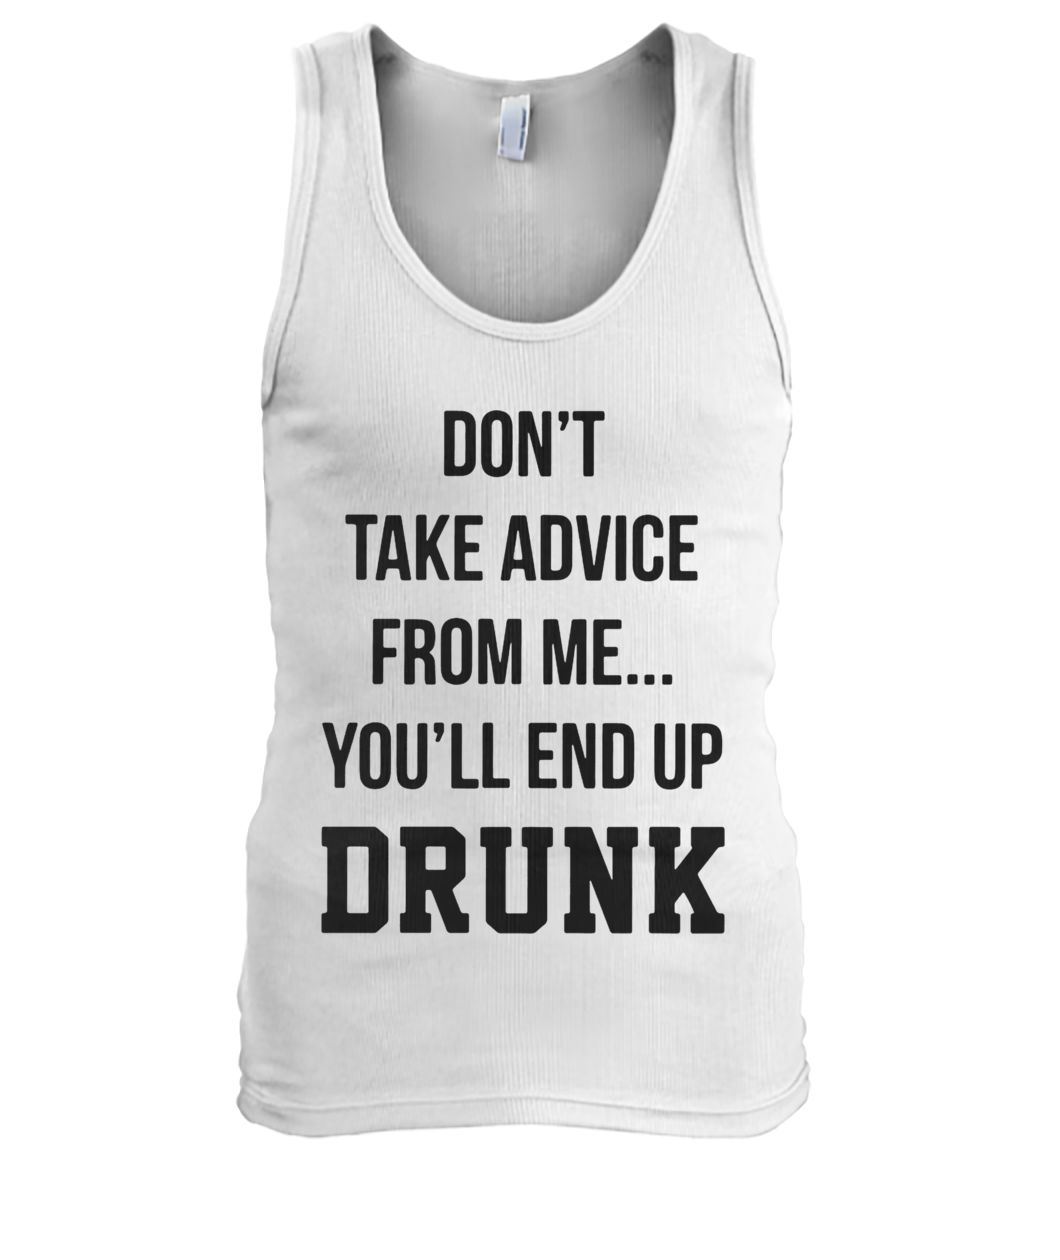 Don't take advice from me you'll end up drunk men's tank top